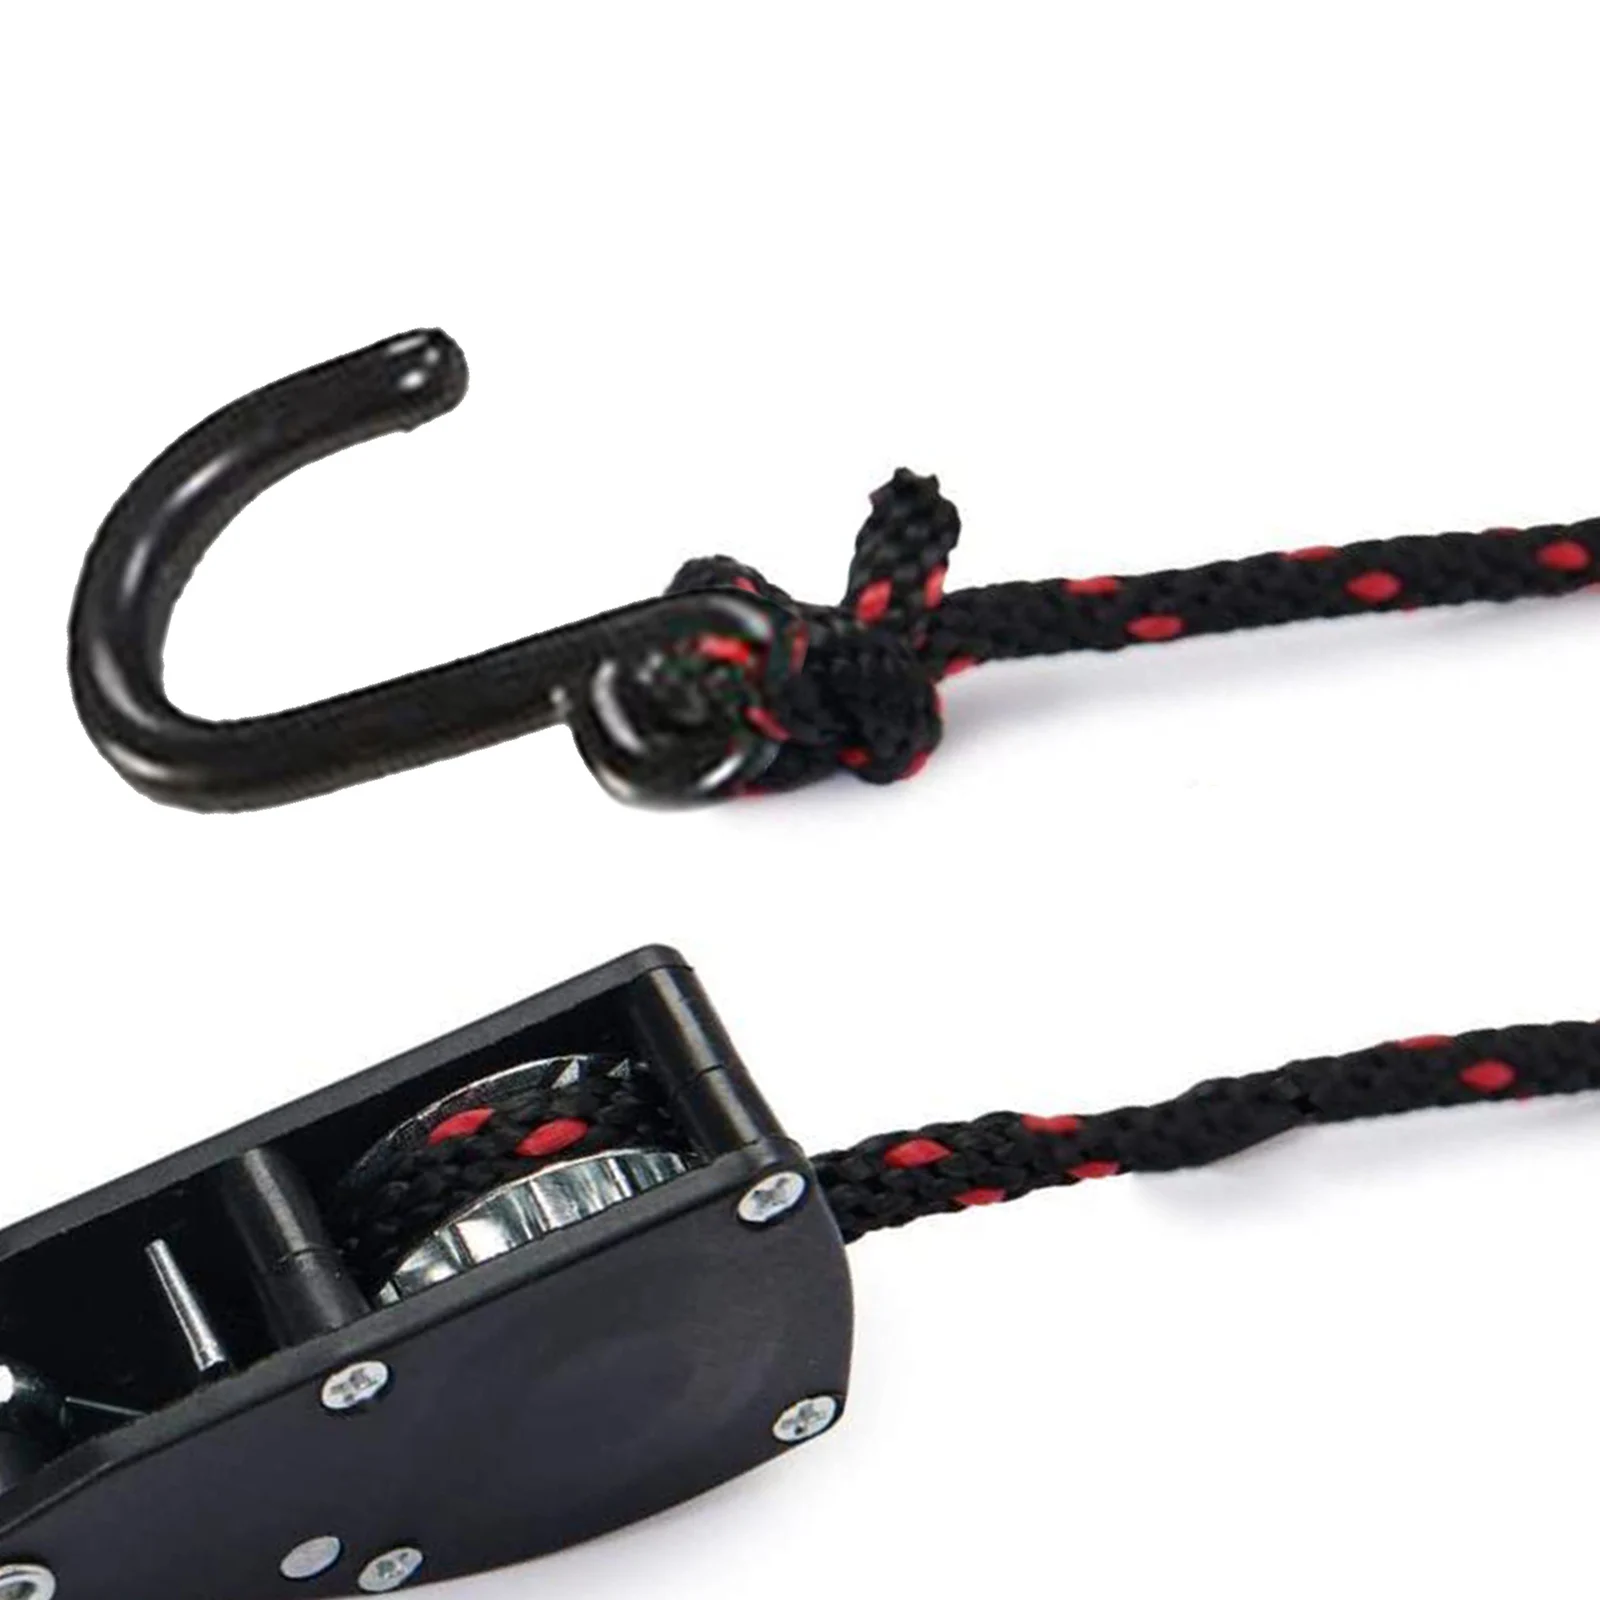 (Set of 2) - AA Products Ratchet Kayak And Canoe Bow And Stern Tie Down